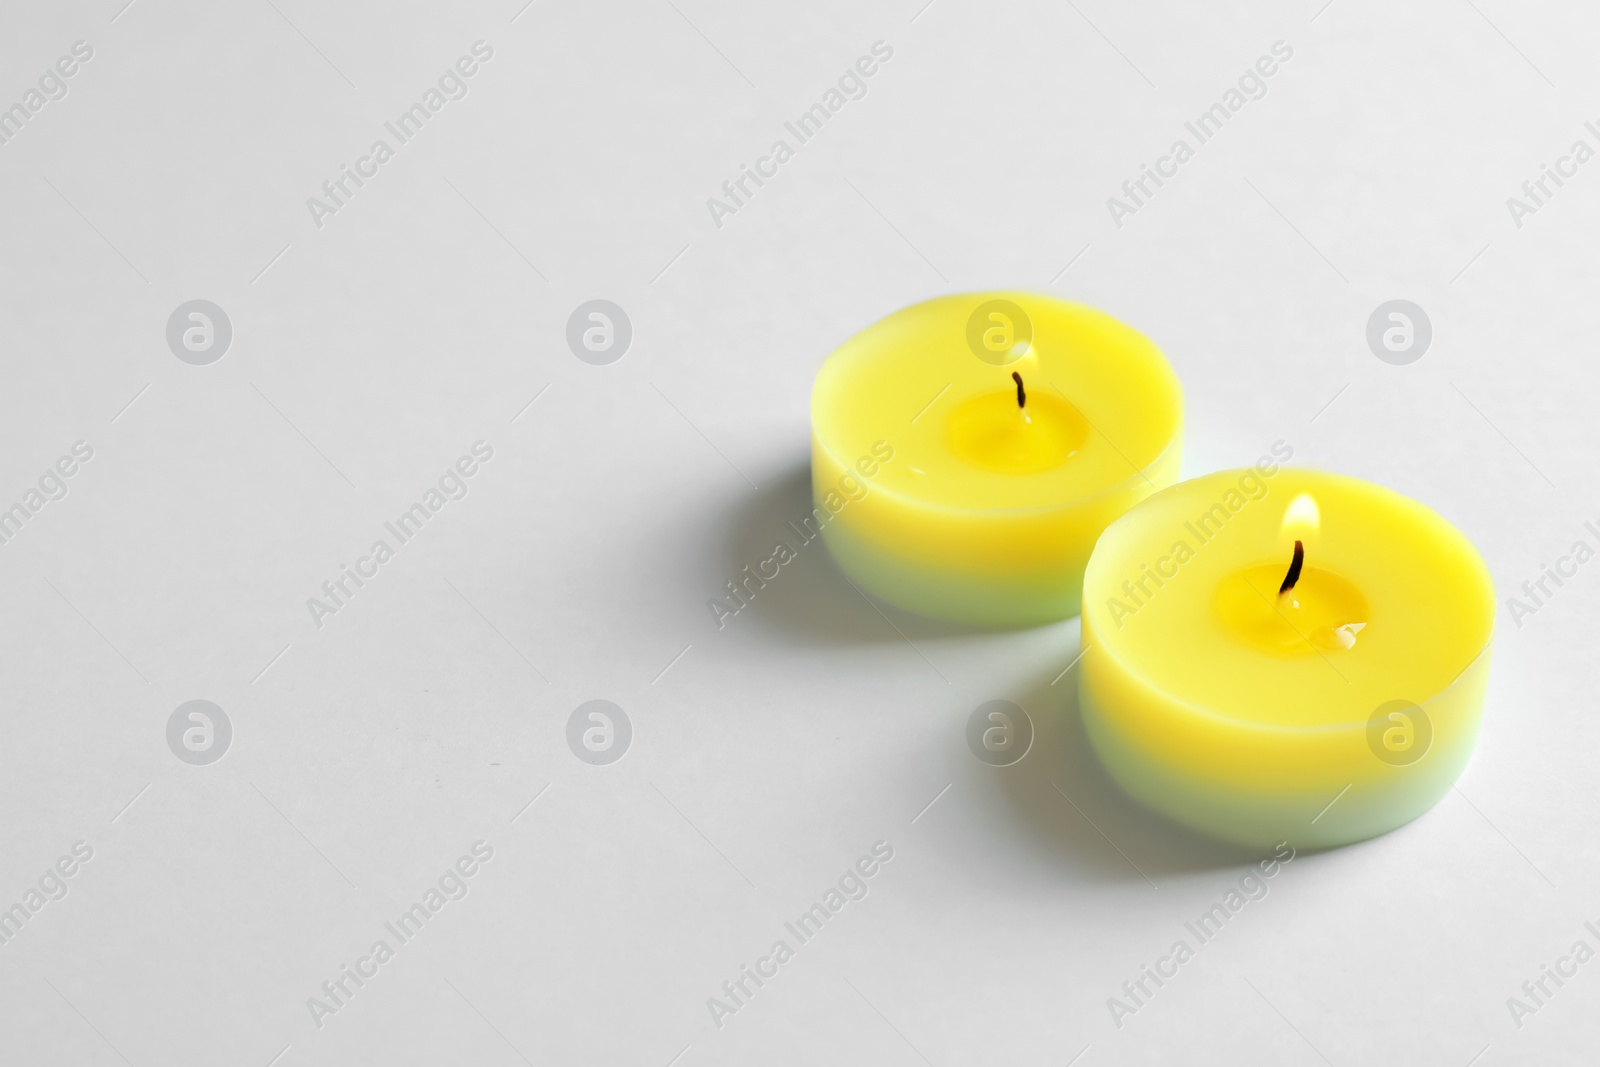 Photo of Colorful wax candles burning on white background